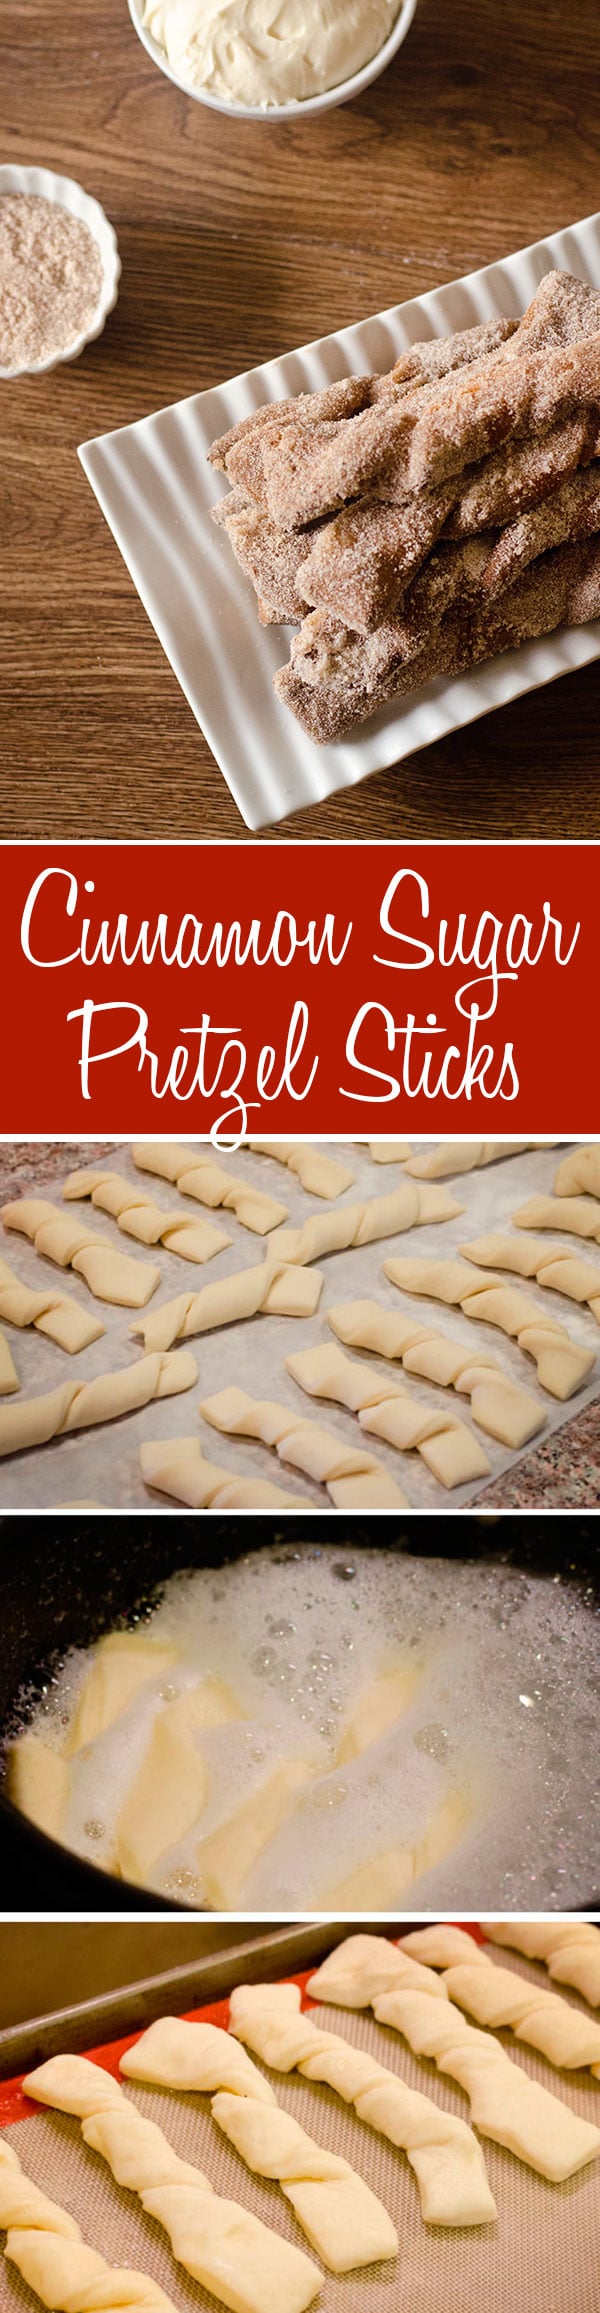 making soft pretzel sticks are easy and delicious, especially covered with cinnamon and sugar and dipped in cream cheese frosting